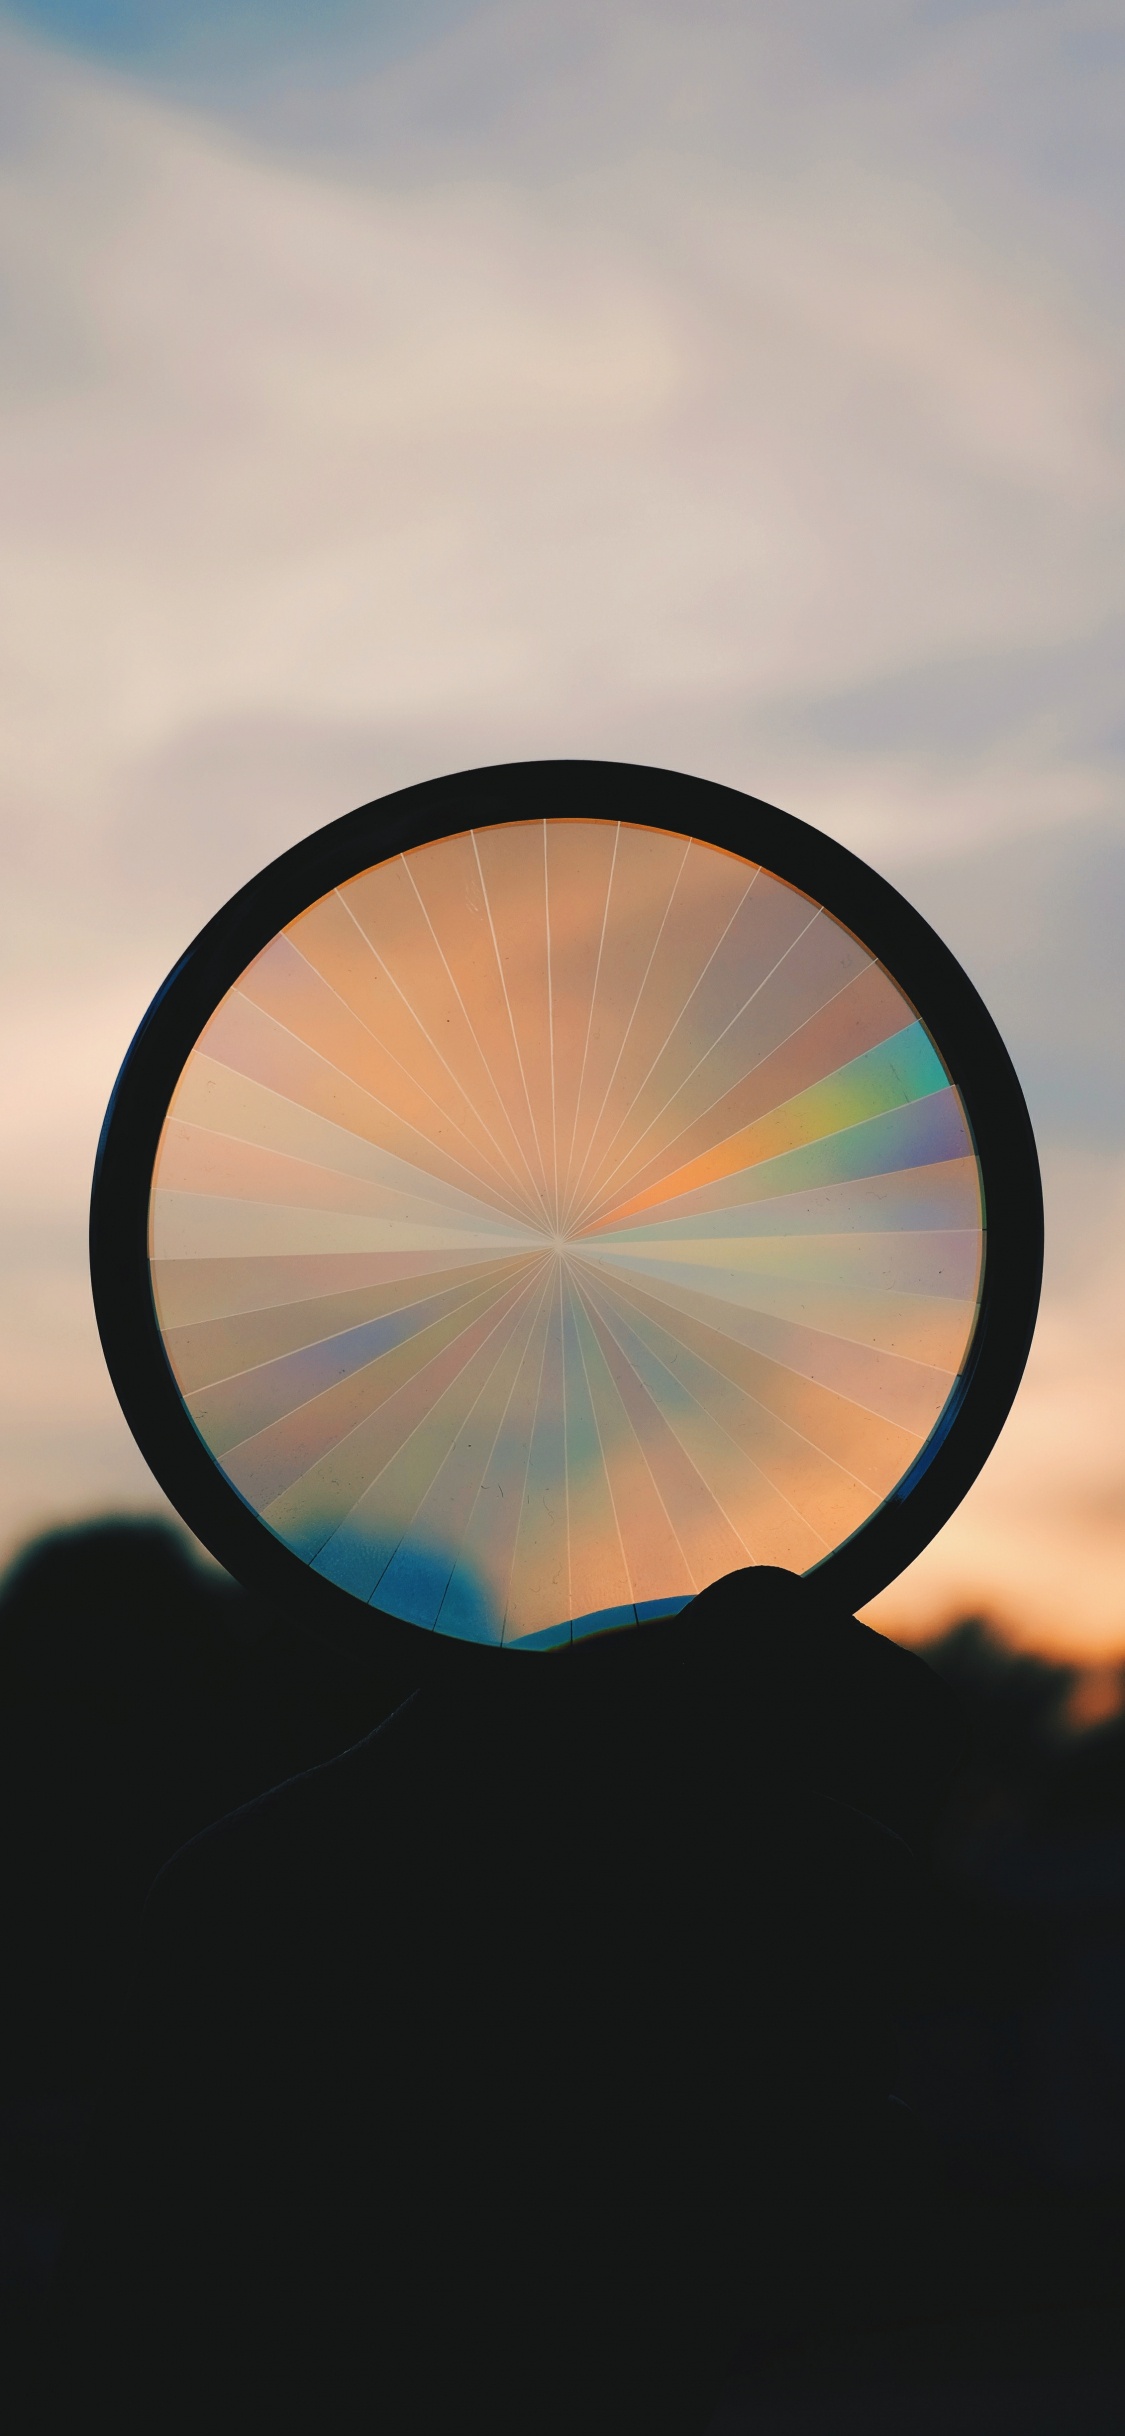 Silhouette of Round Mirror With Sun Rays. Wallpaper in 1125x2436 Resolution